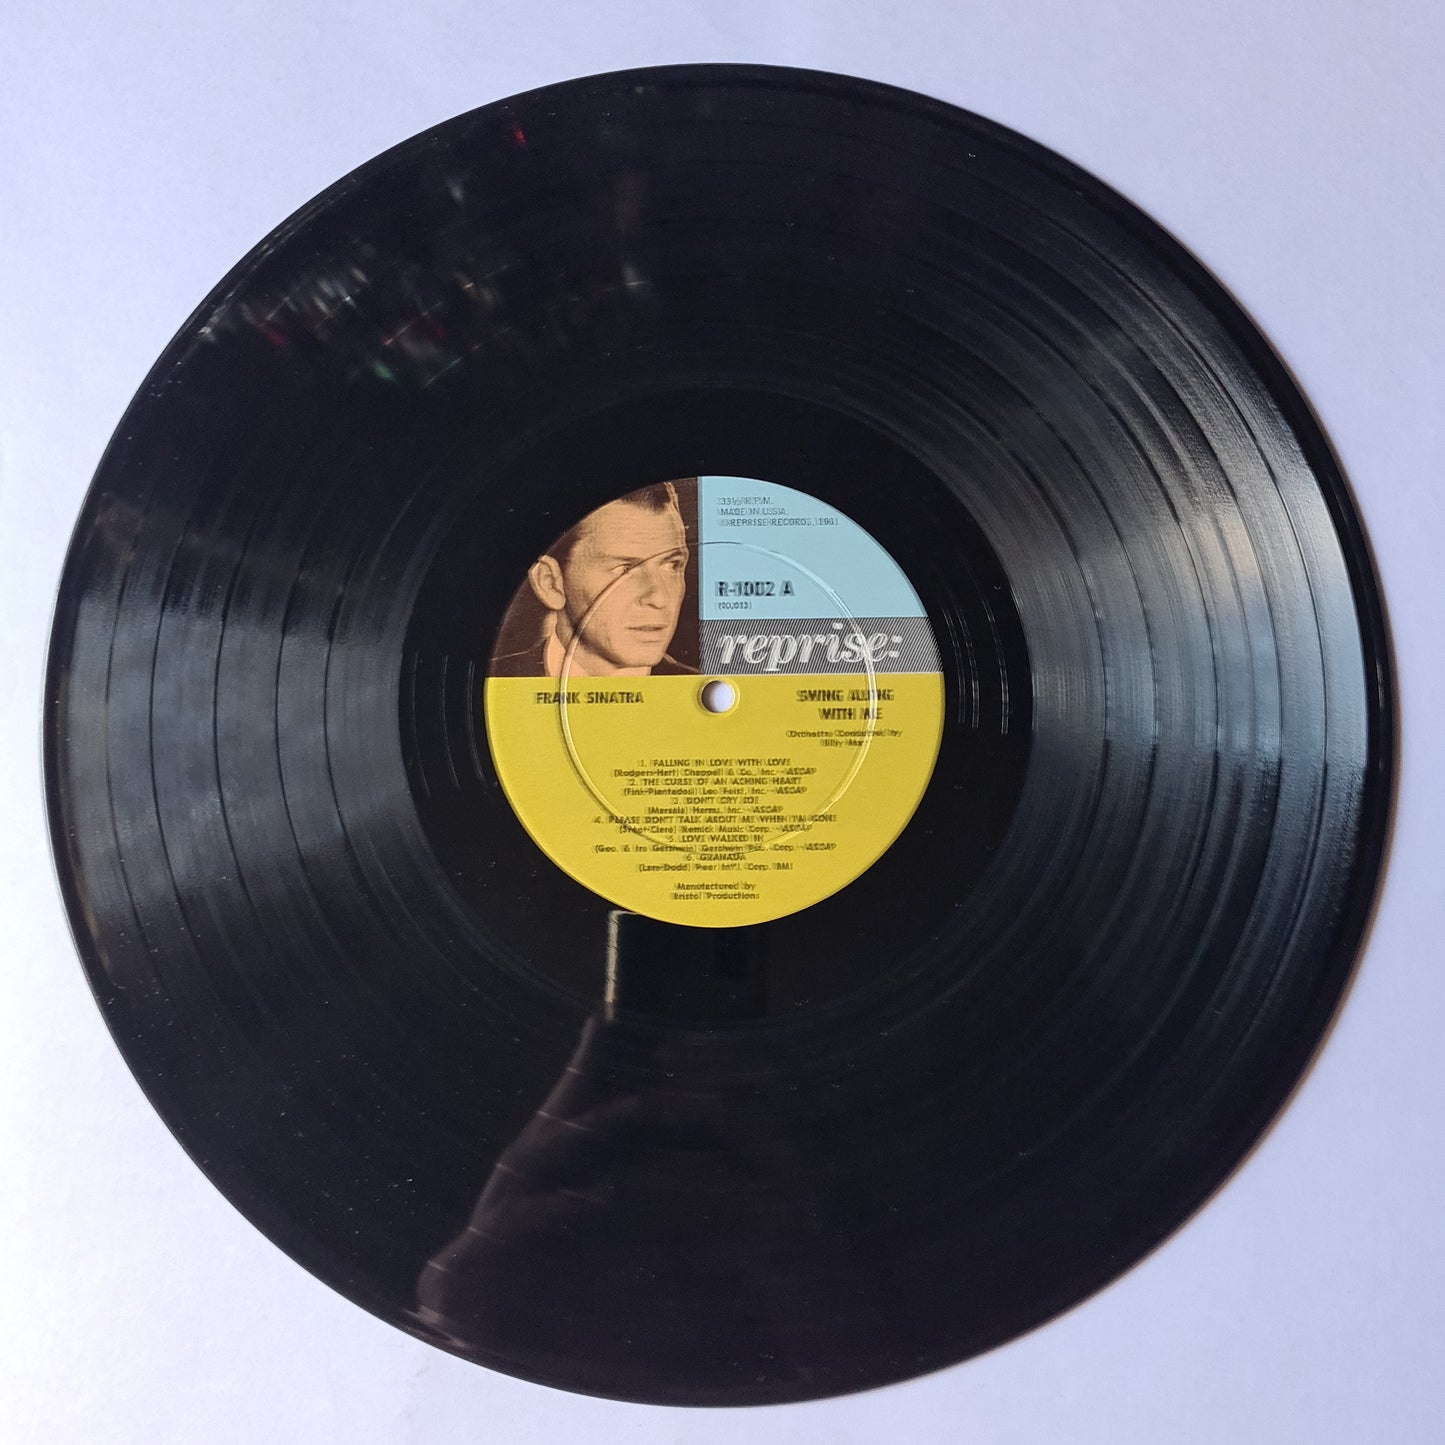 Frank Sinatra – Swing Along With Me - 1961 - Vinyl Record